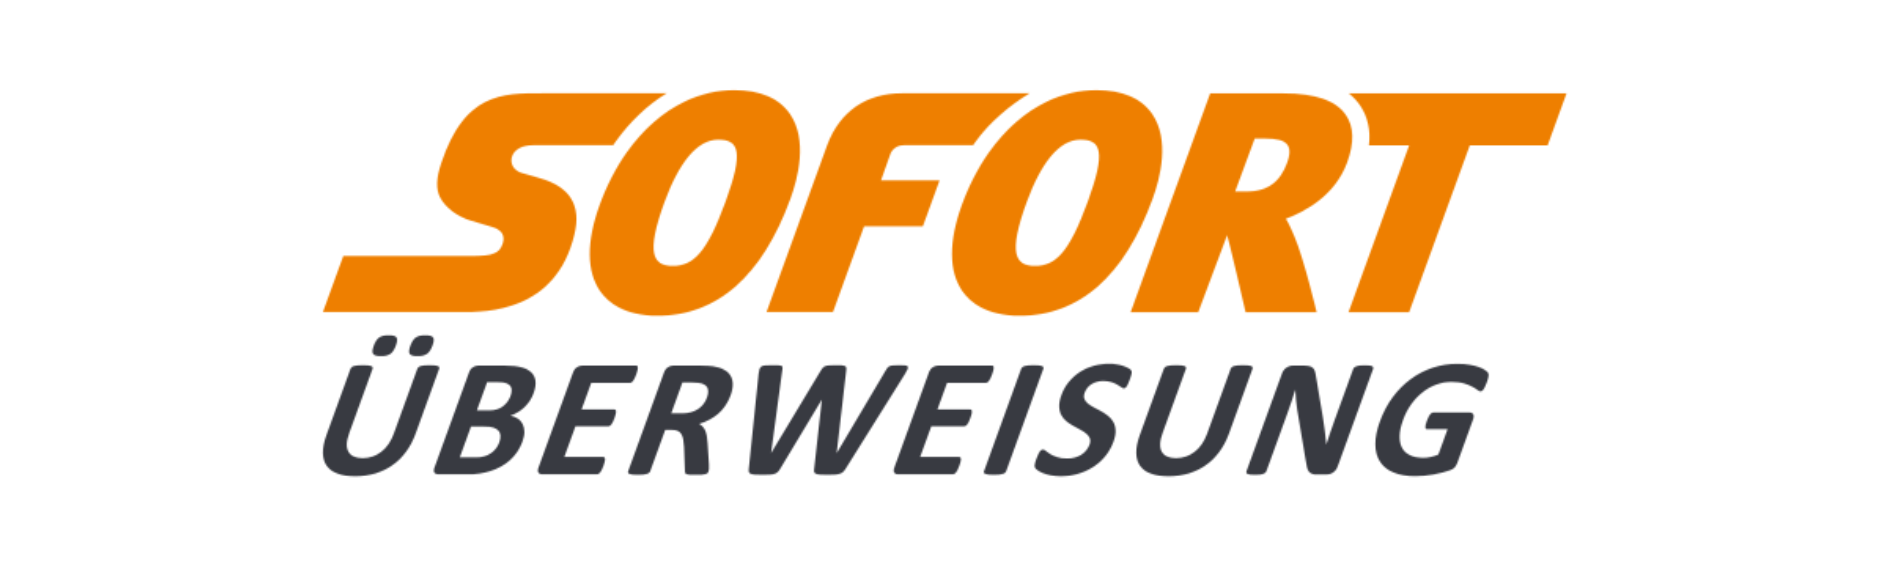 logo of payment by Sofortueberweisung